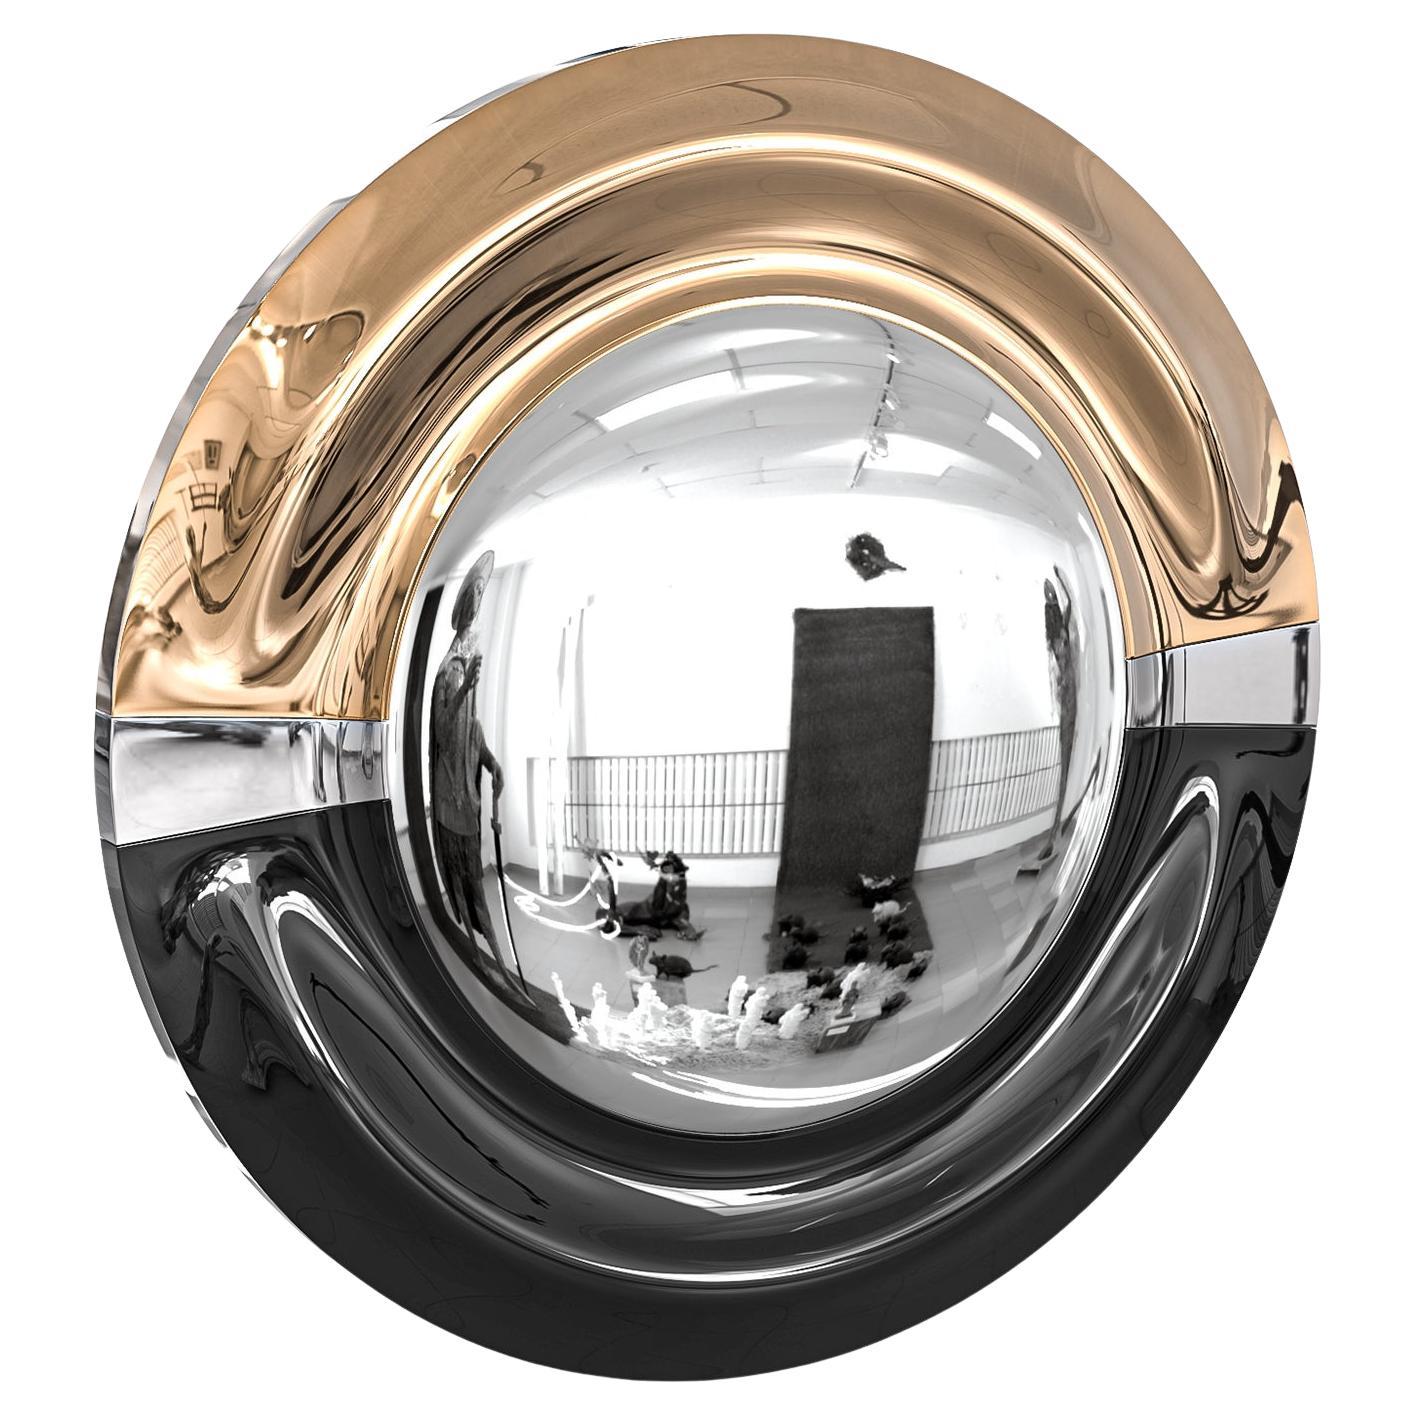 "Aurora" Convex Wall Mirror with Bronze and Stainless Steel, Istanbul For Sale